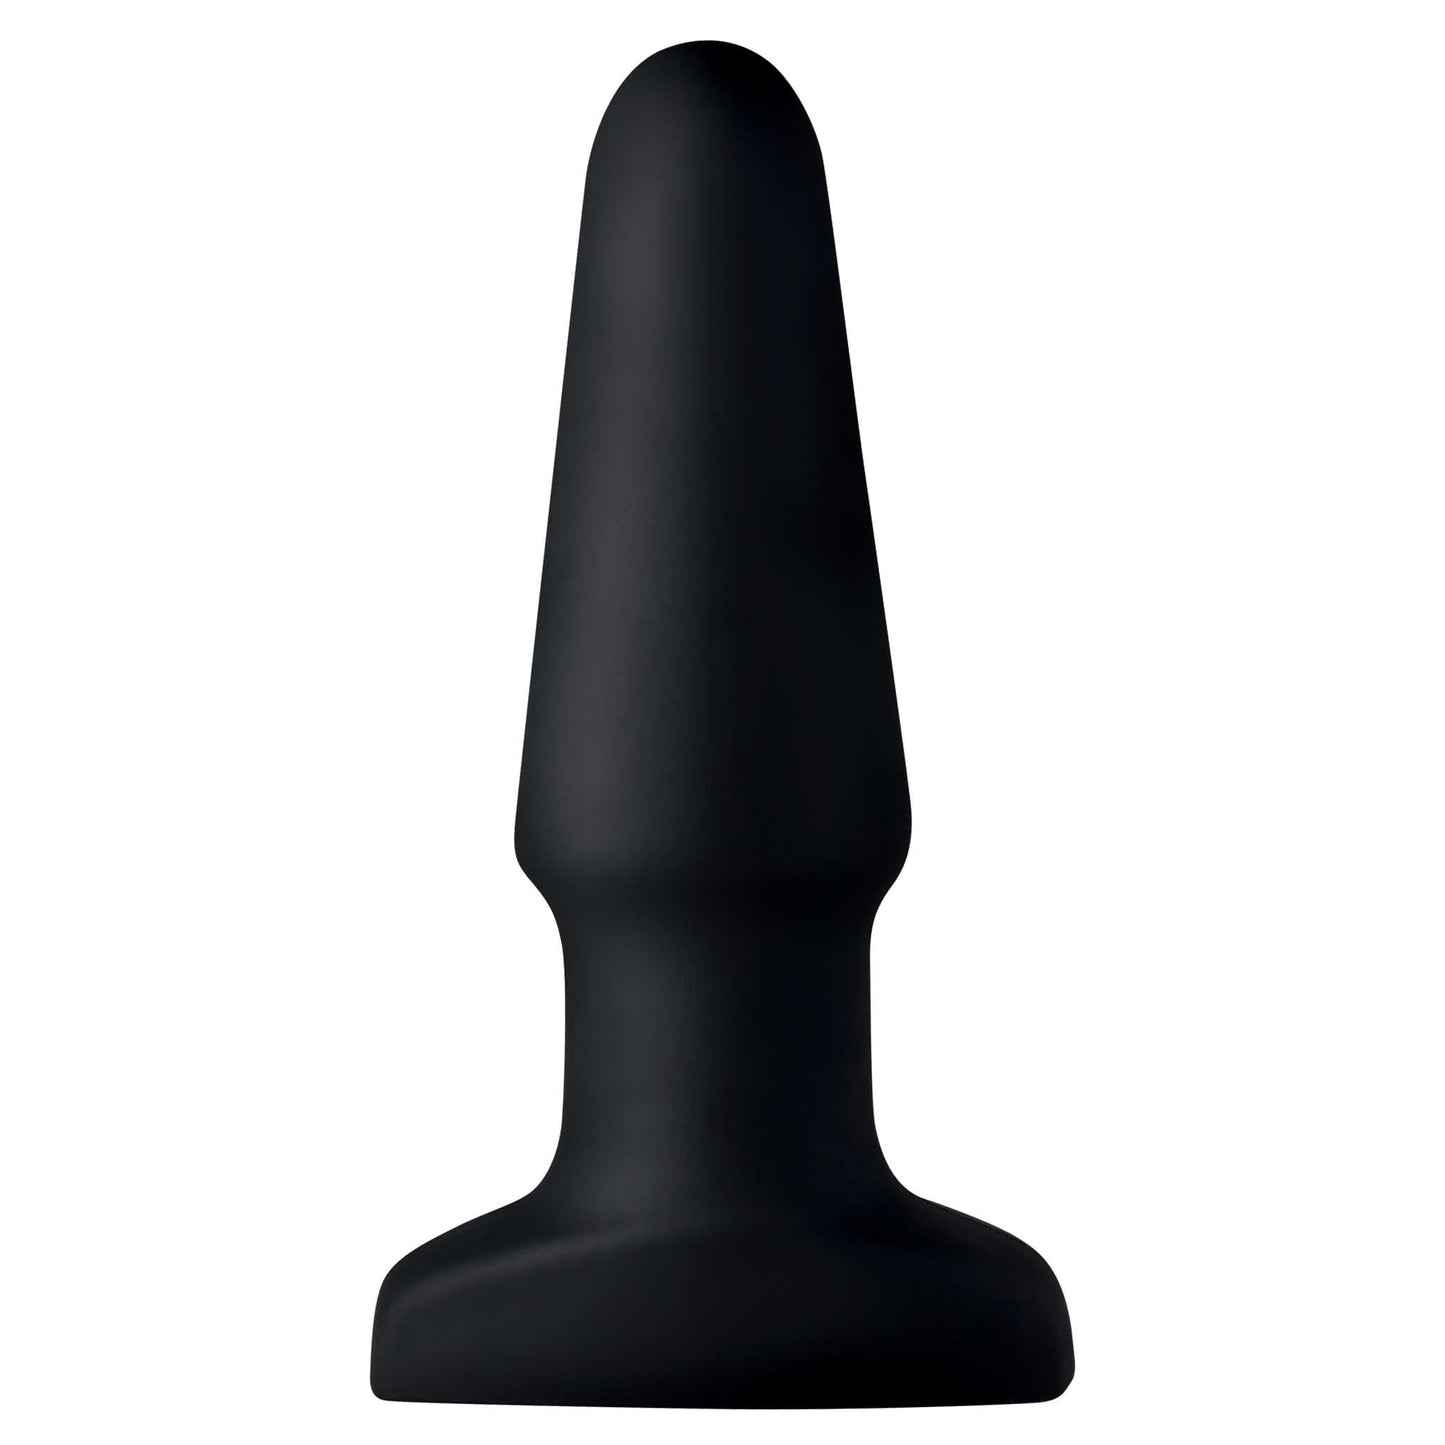 Swell Inflatable Rechargeable Silicone Vibrating Anal Plug - Black